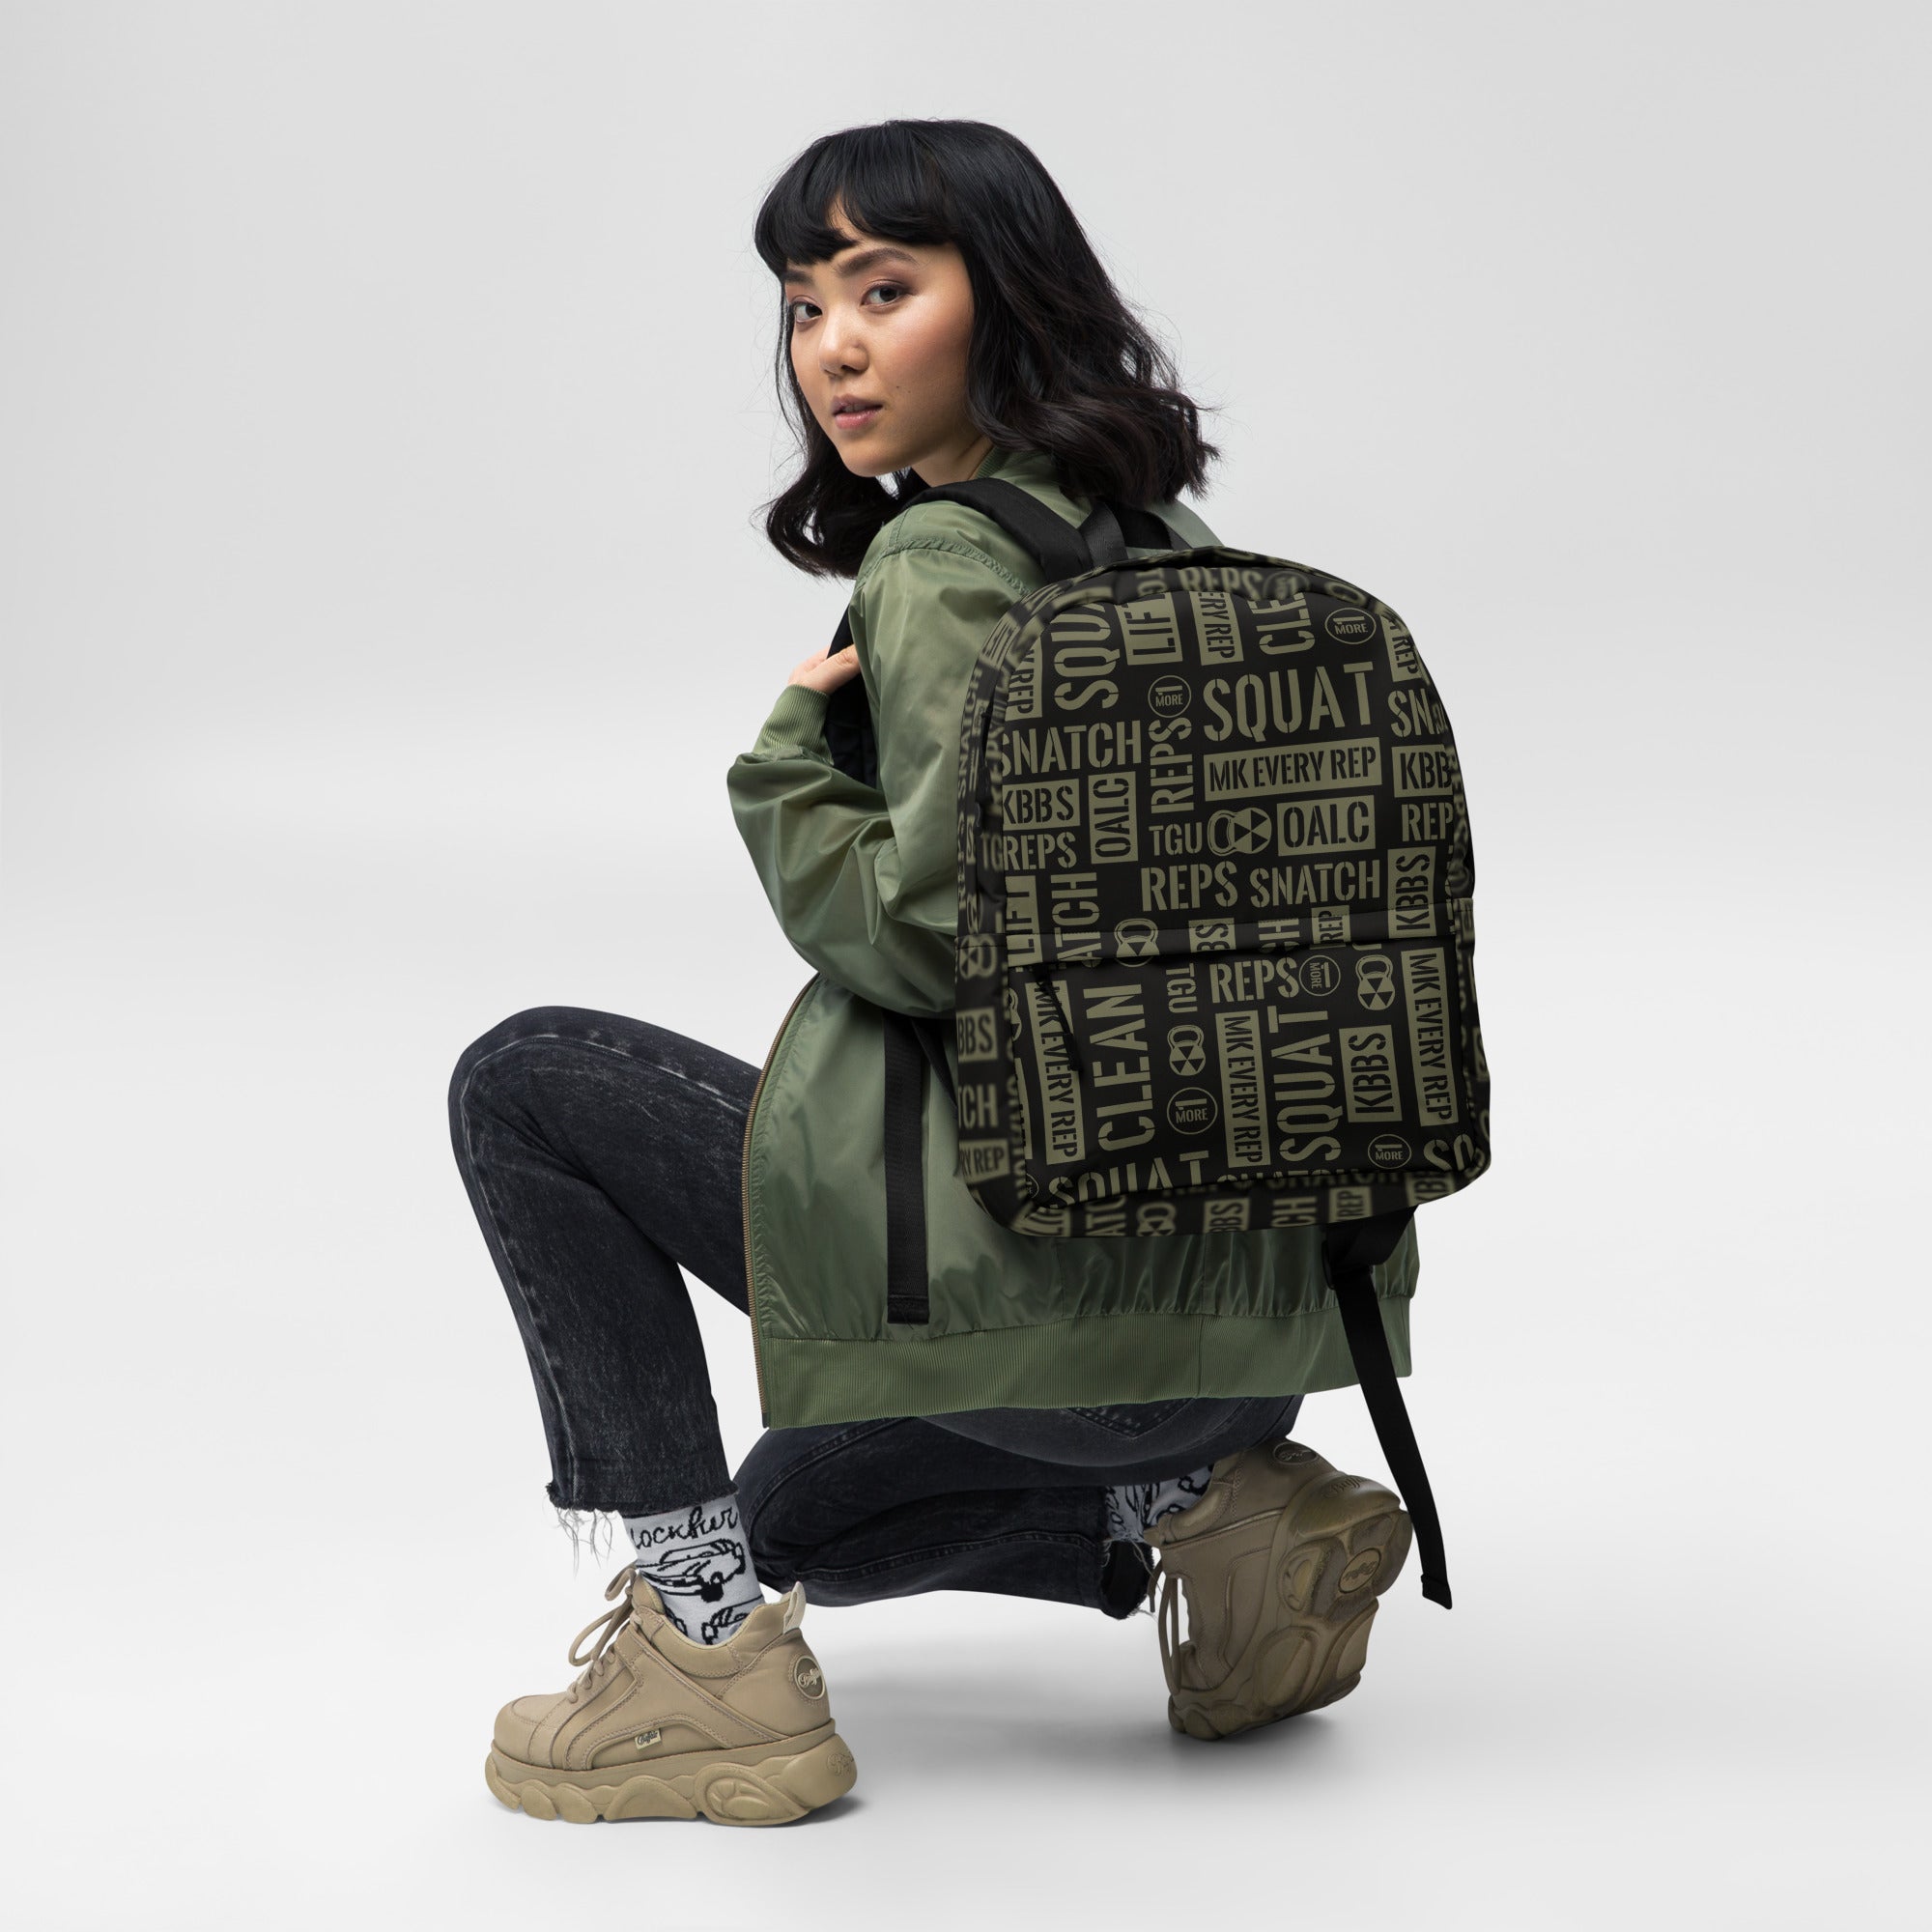 Black/Military Green Acronyms Backpack